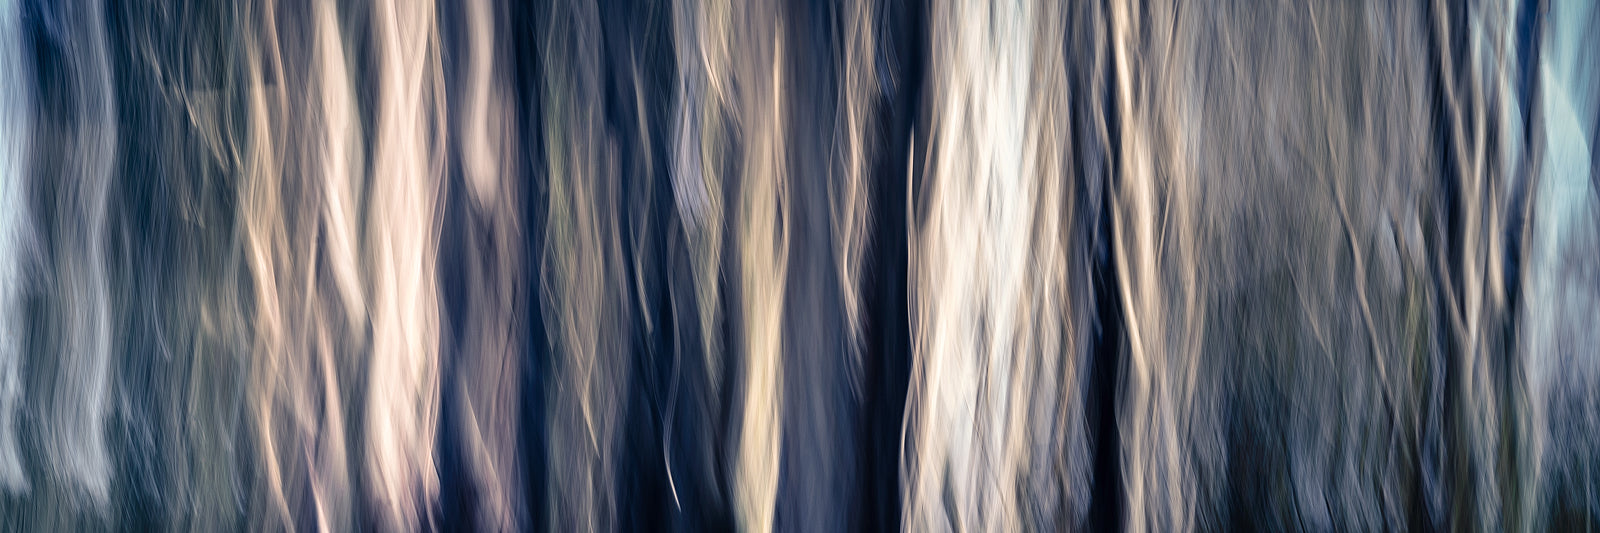 Abstract photo of trees in the Clare Valley